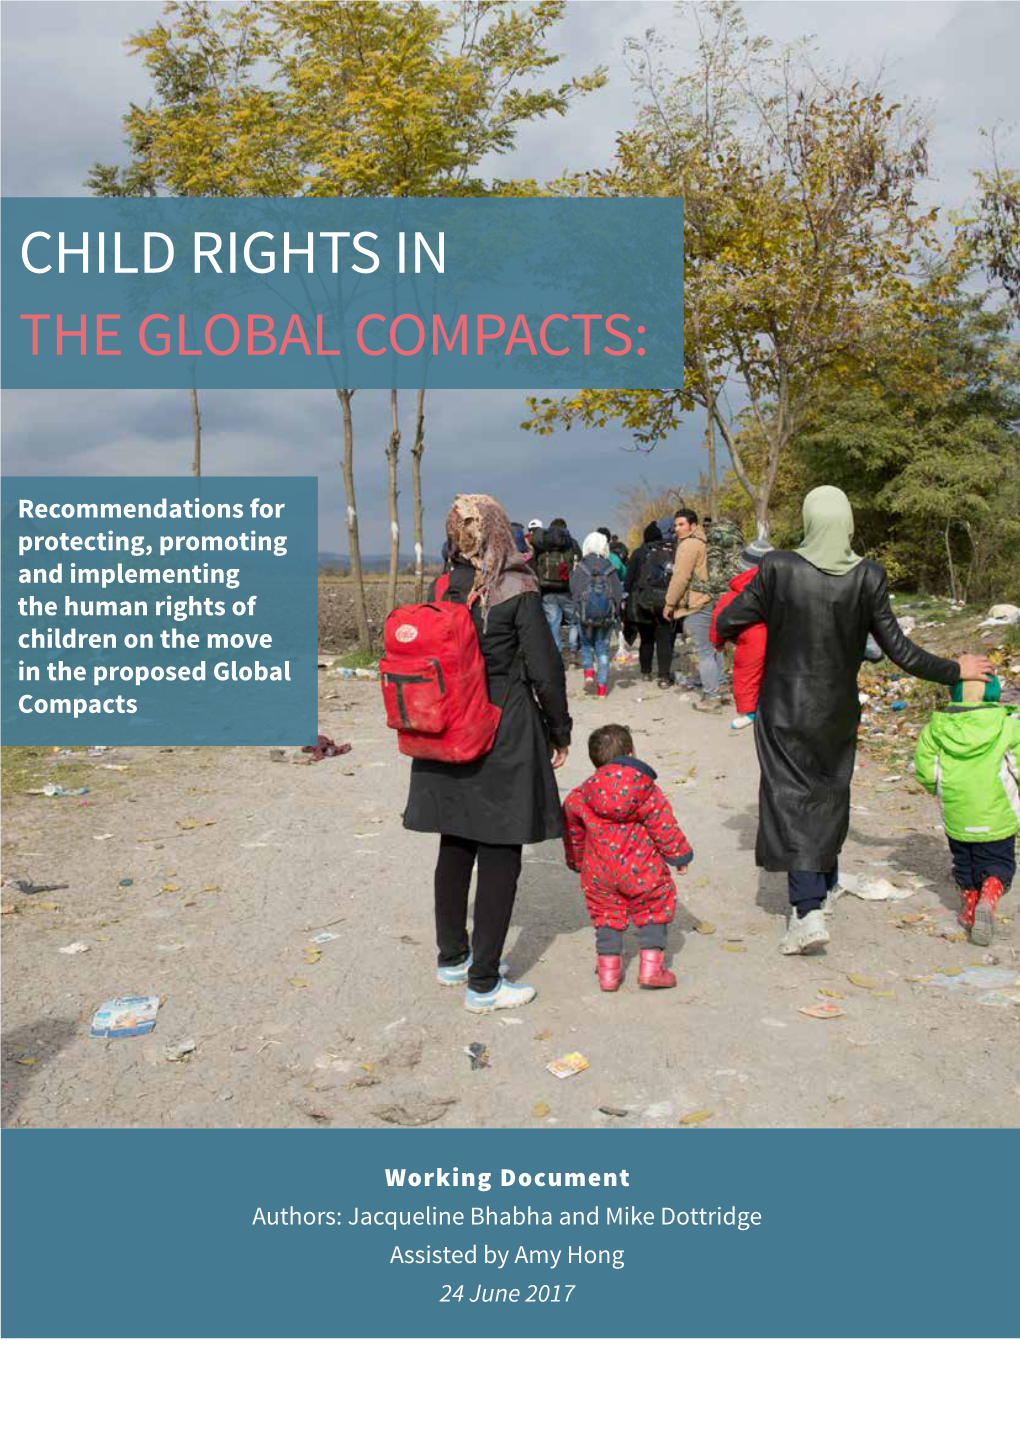 Child Rights in the Global Compacts